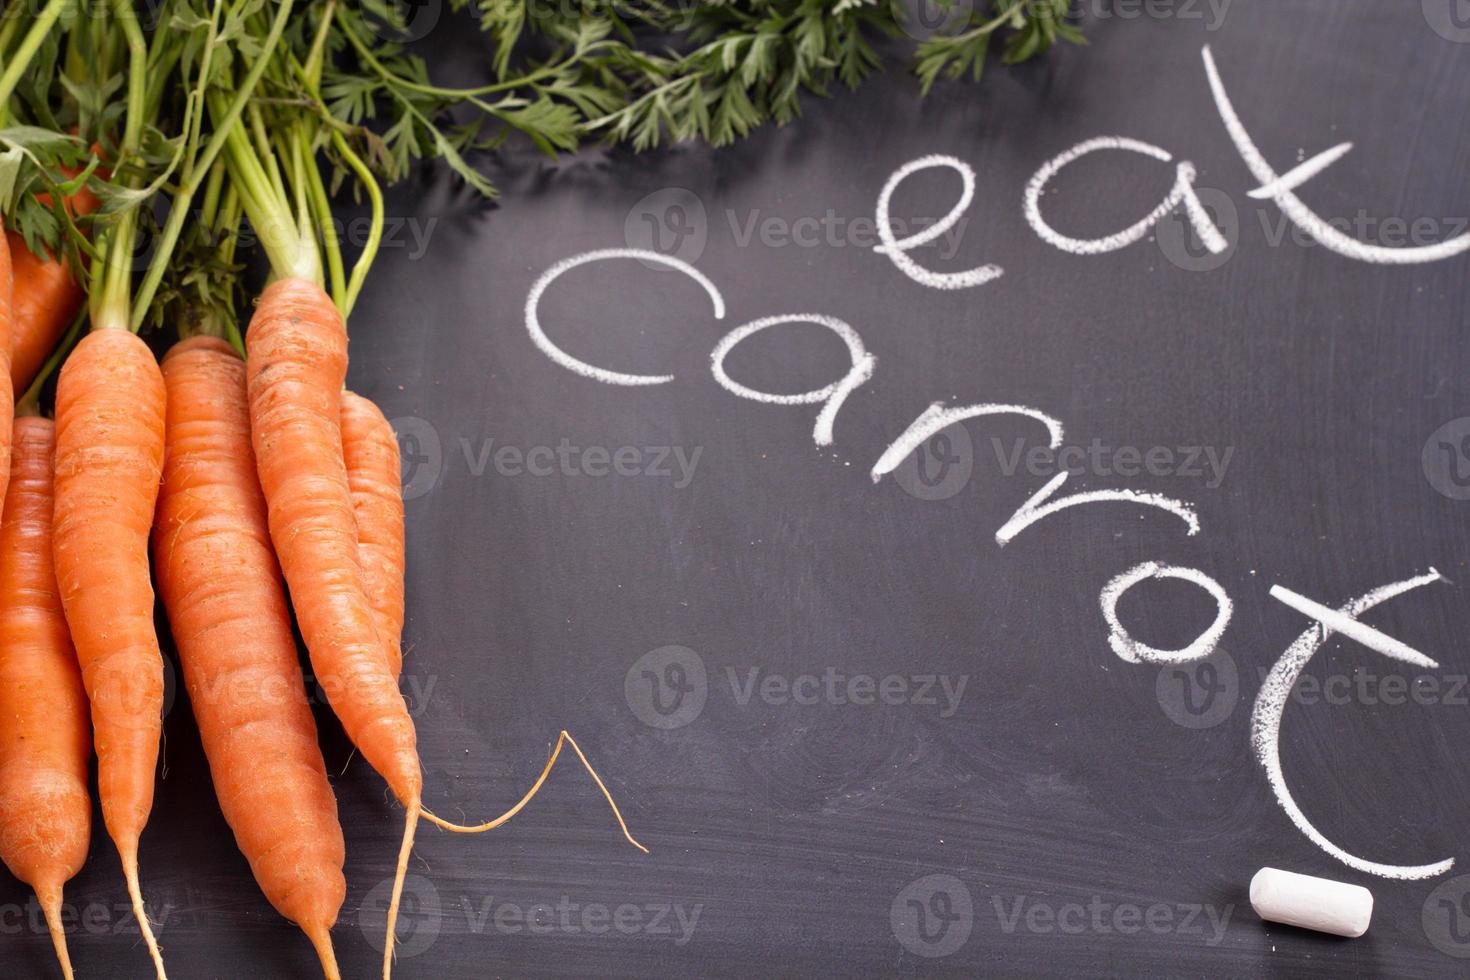 Fresh carrot with green leaves photo